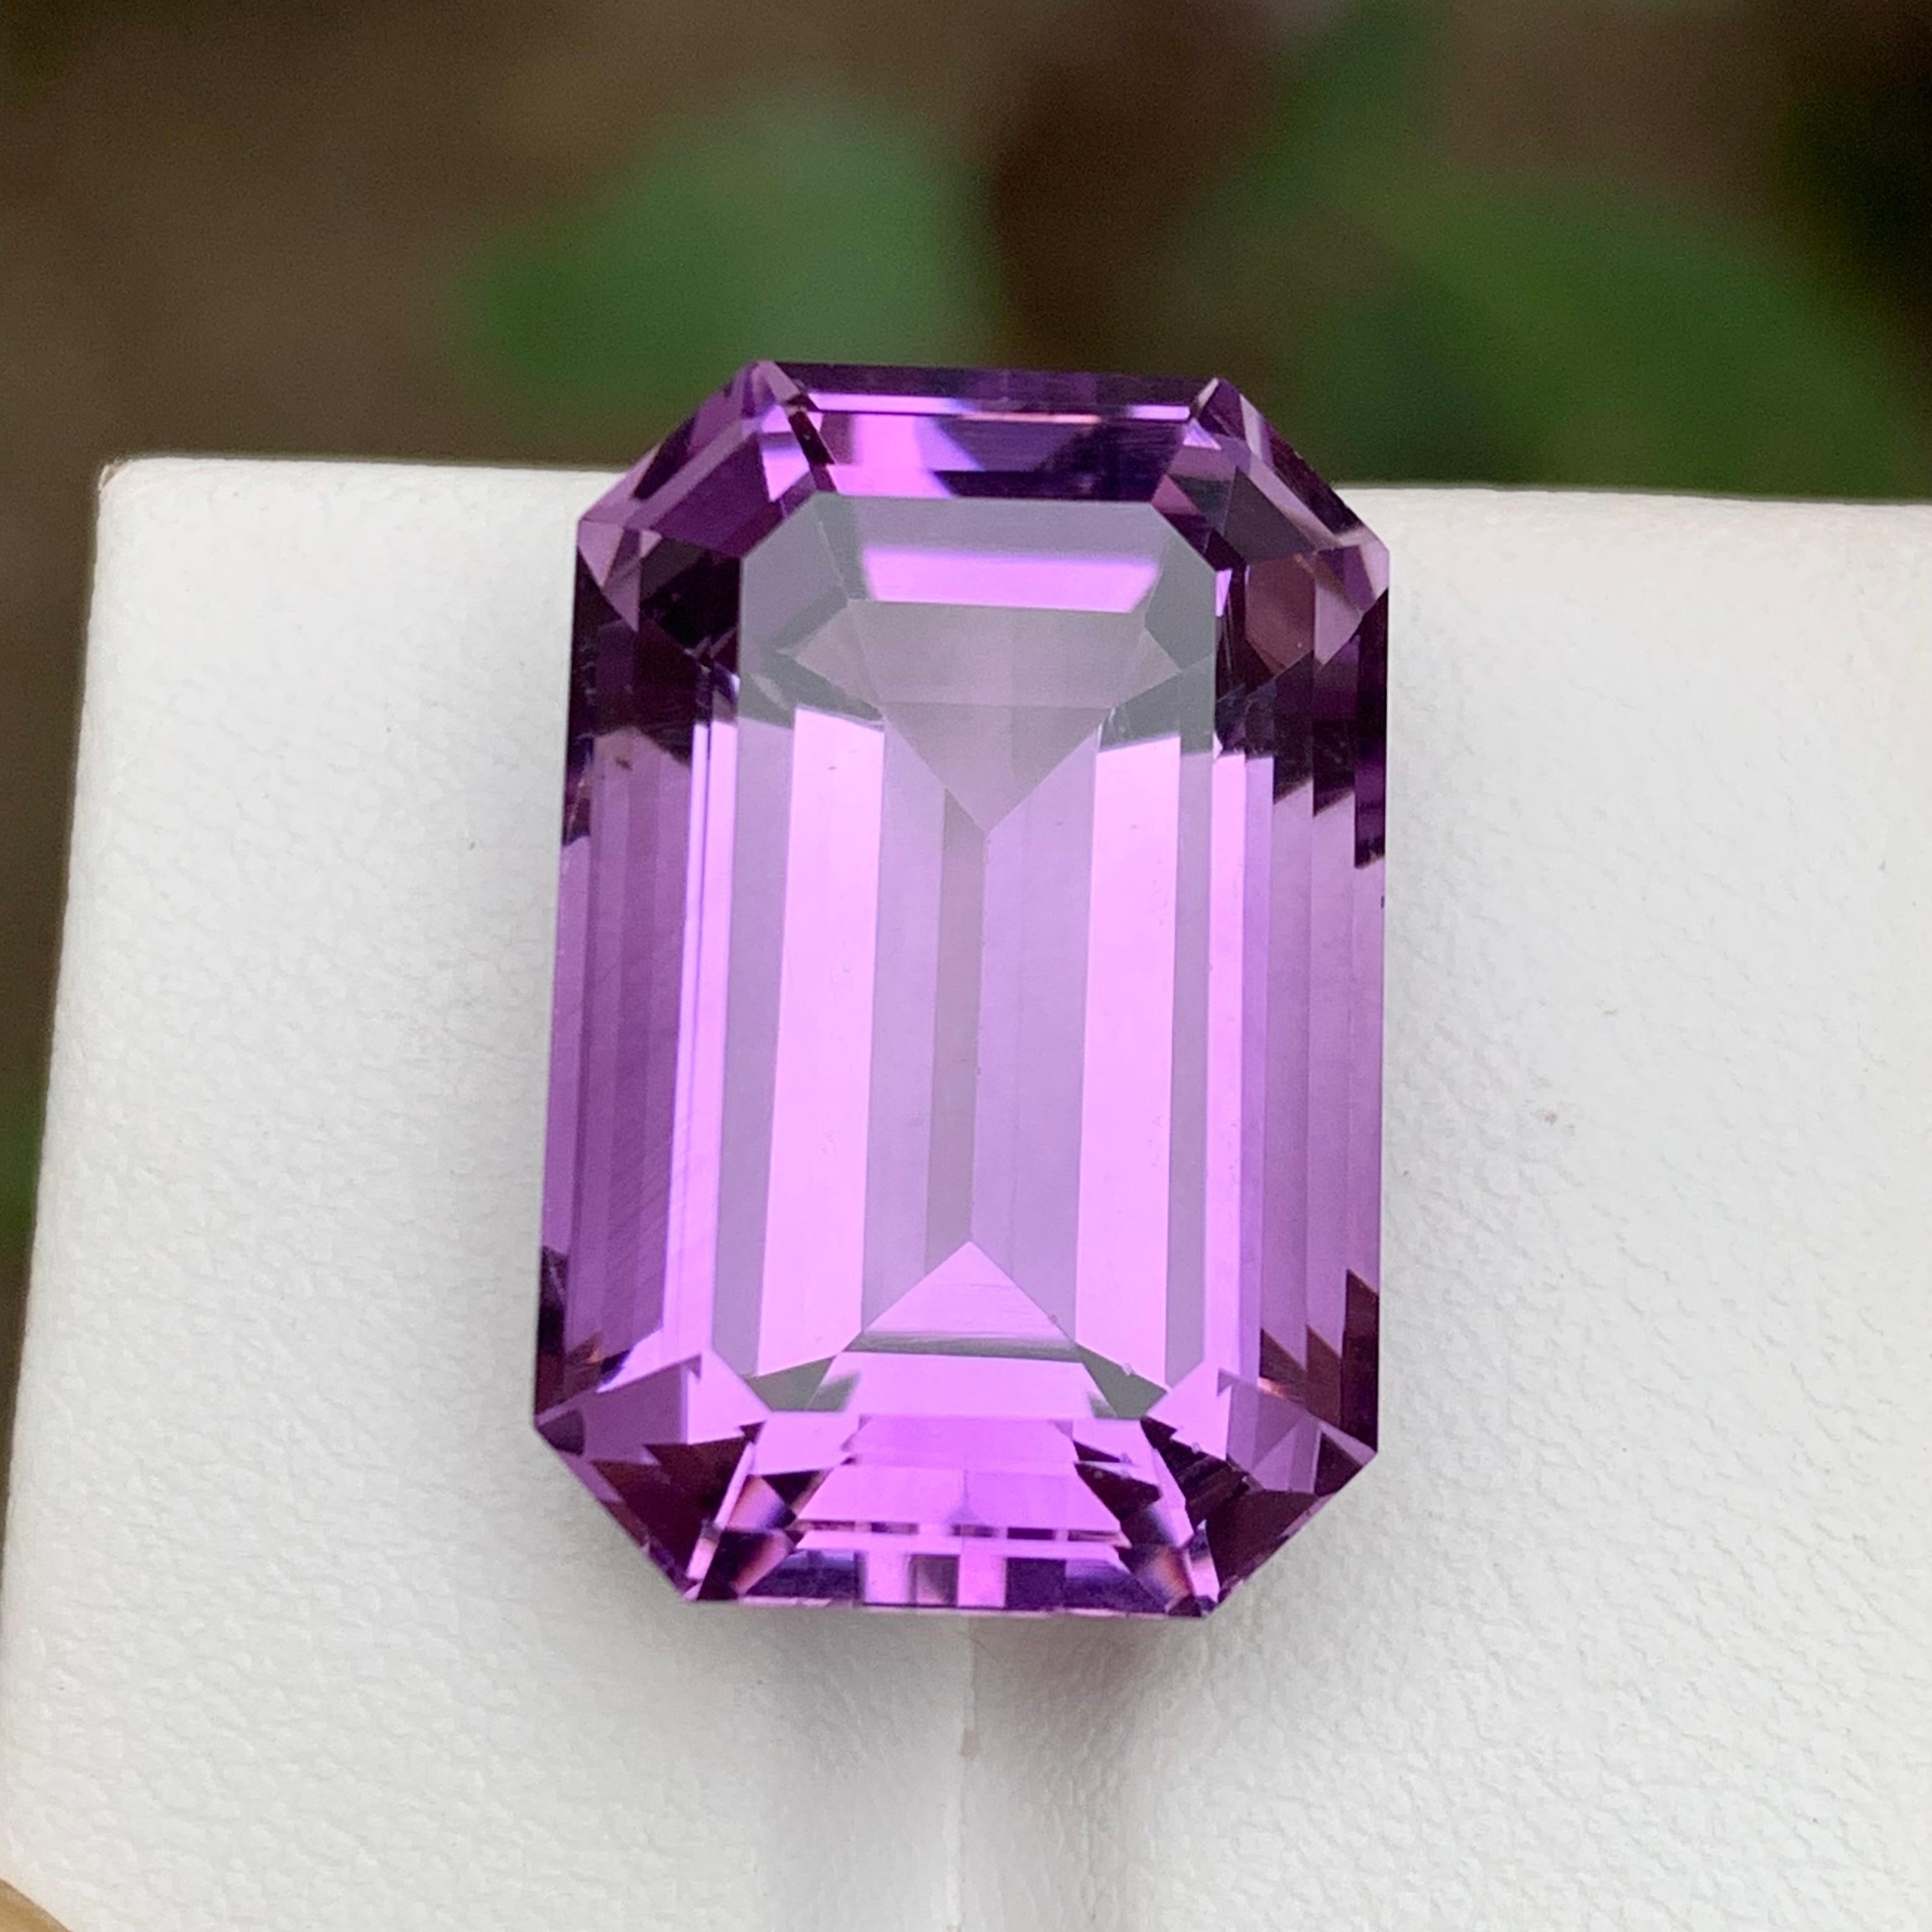 GEMSTONE TYPE: Amethyst 
PIECE(S): 1
WEIGHT: 27.30 Carats
SHAPE: Step Emerald Cut
SIZE (MM): 21.79 x 14.32 x 11.82
COLOR: Purple
CLARITY: Eye Clean
TREATMENT: None
ORIGIN: Africa
CERTIFICATE: On demand
(if you require a certificate, kindly request